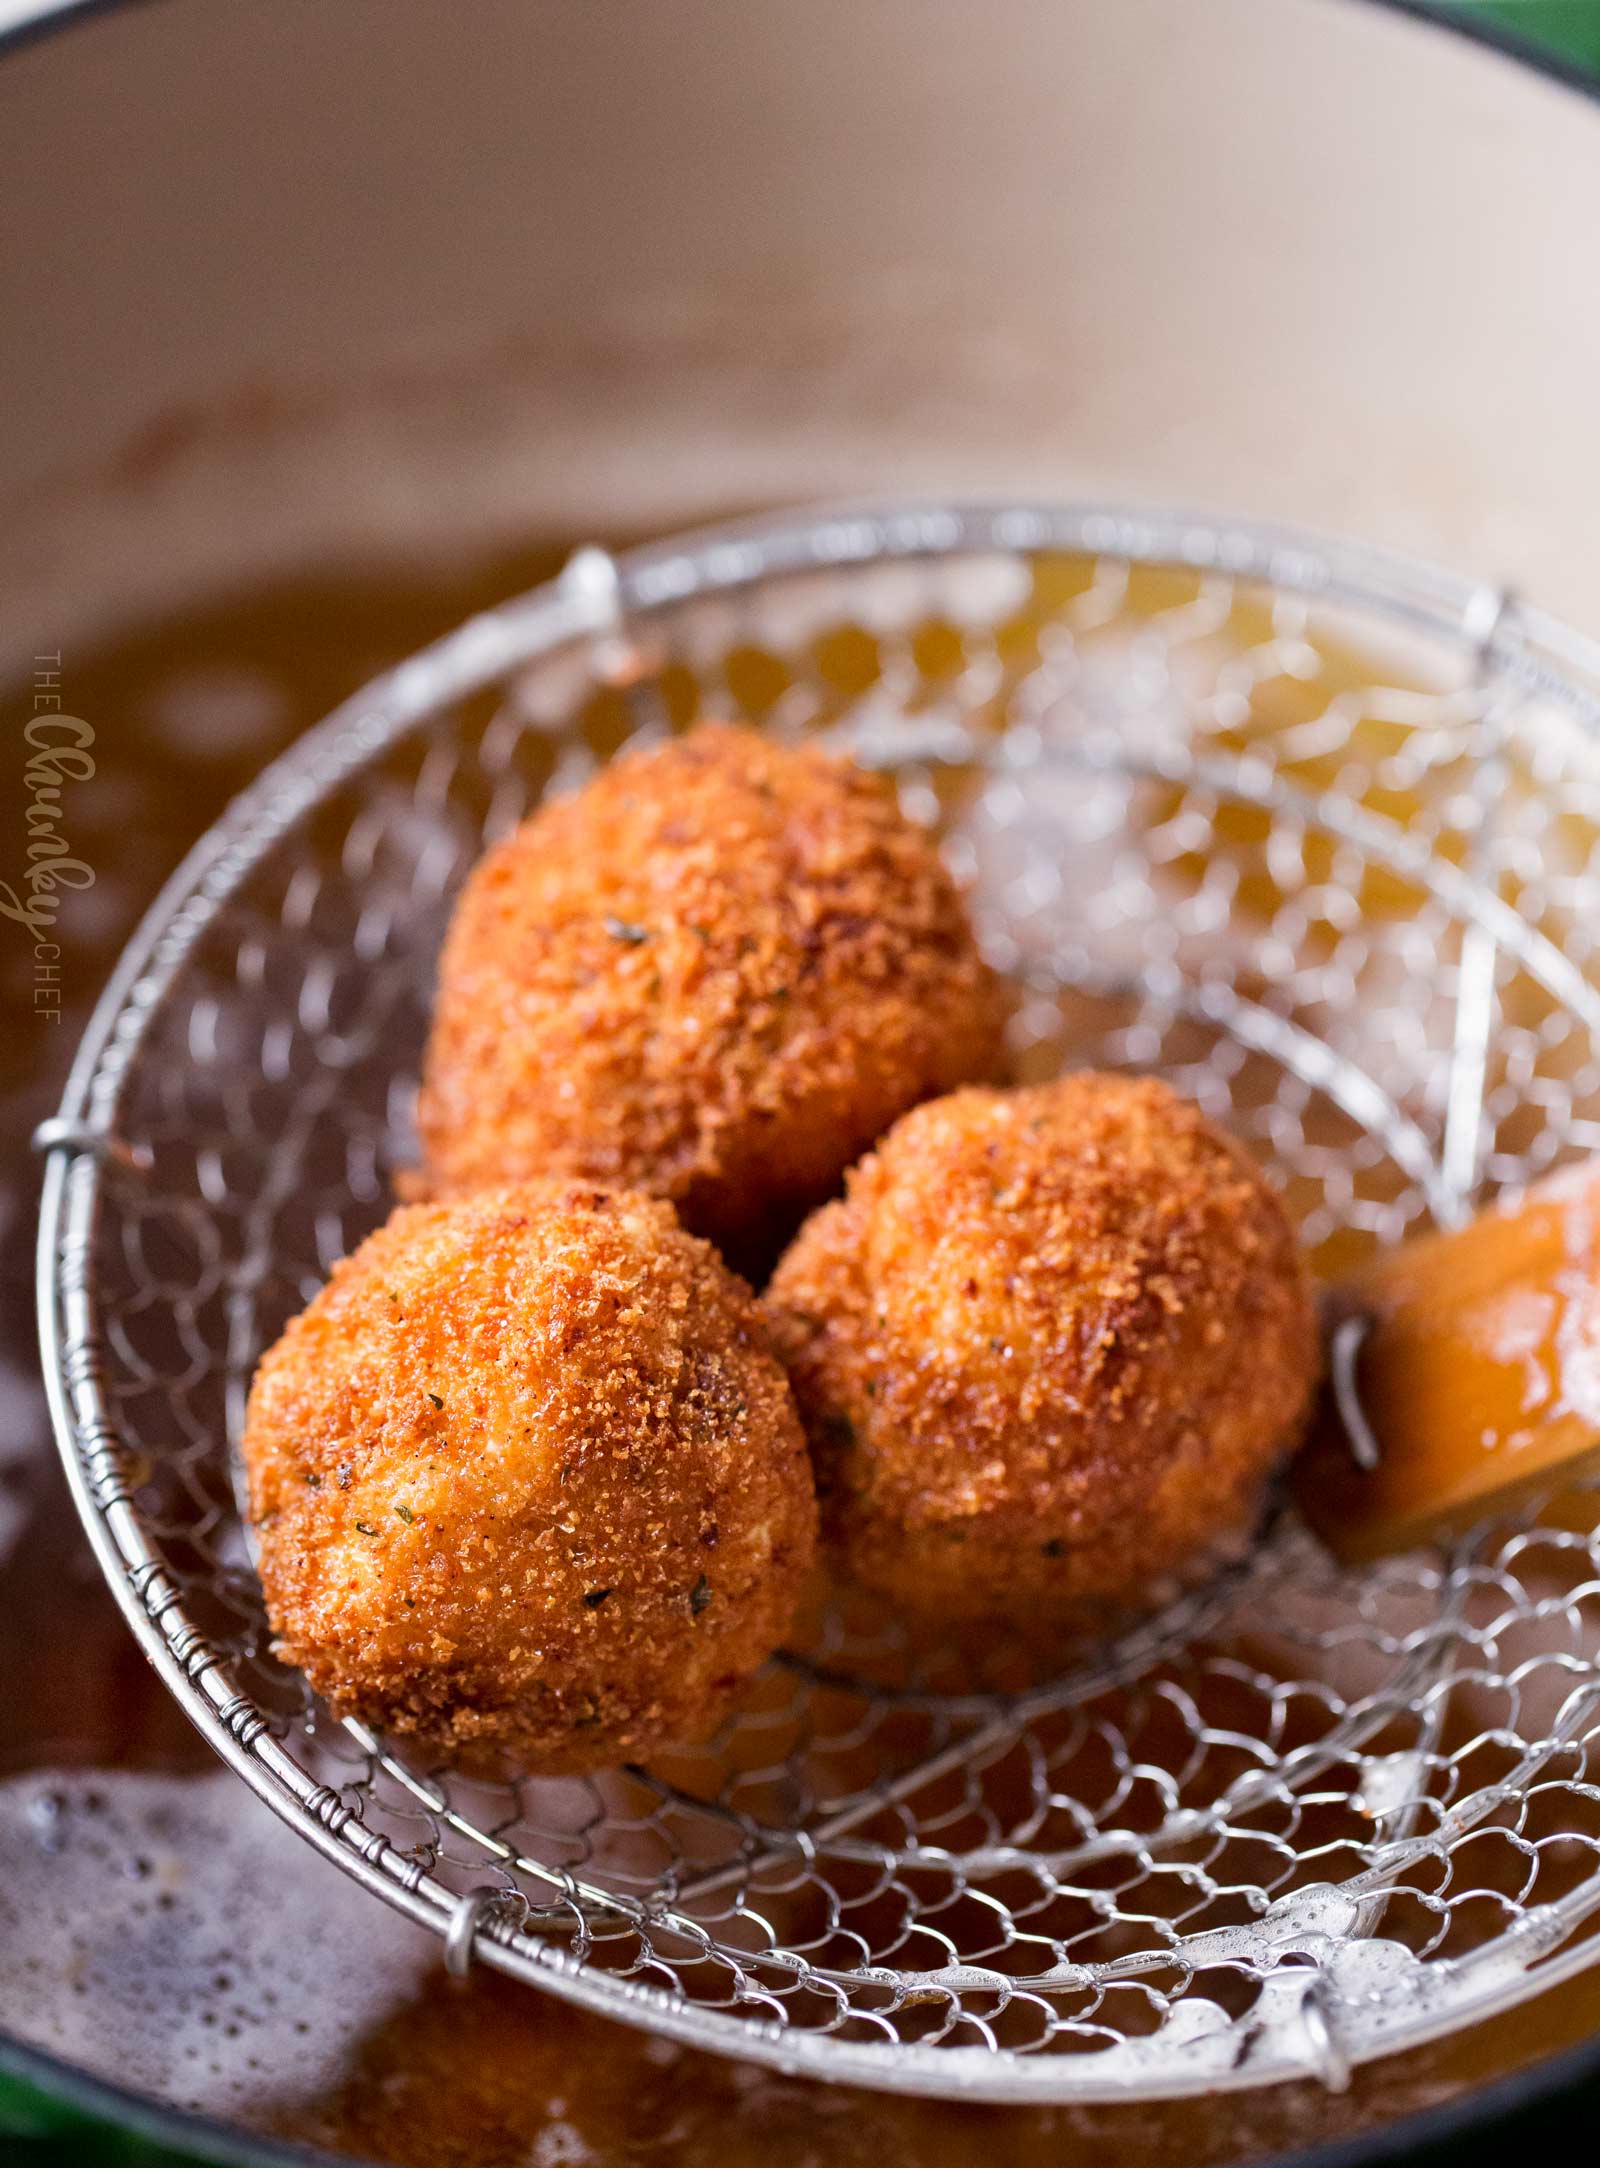 Picture of 3 Mac and cheese bites right out of the fryer